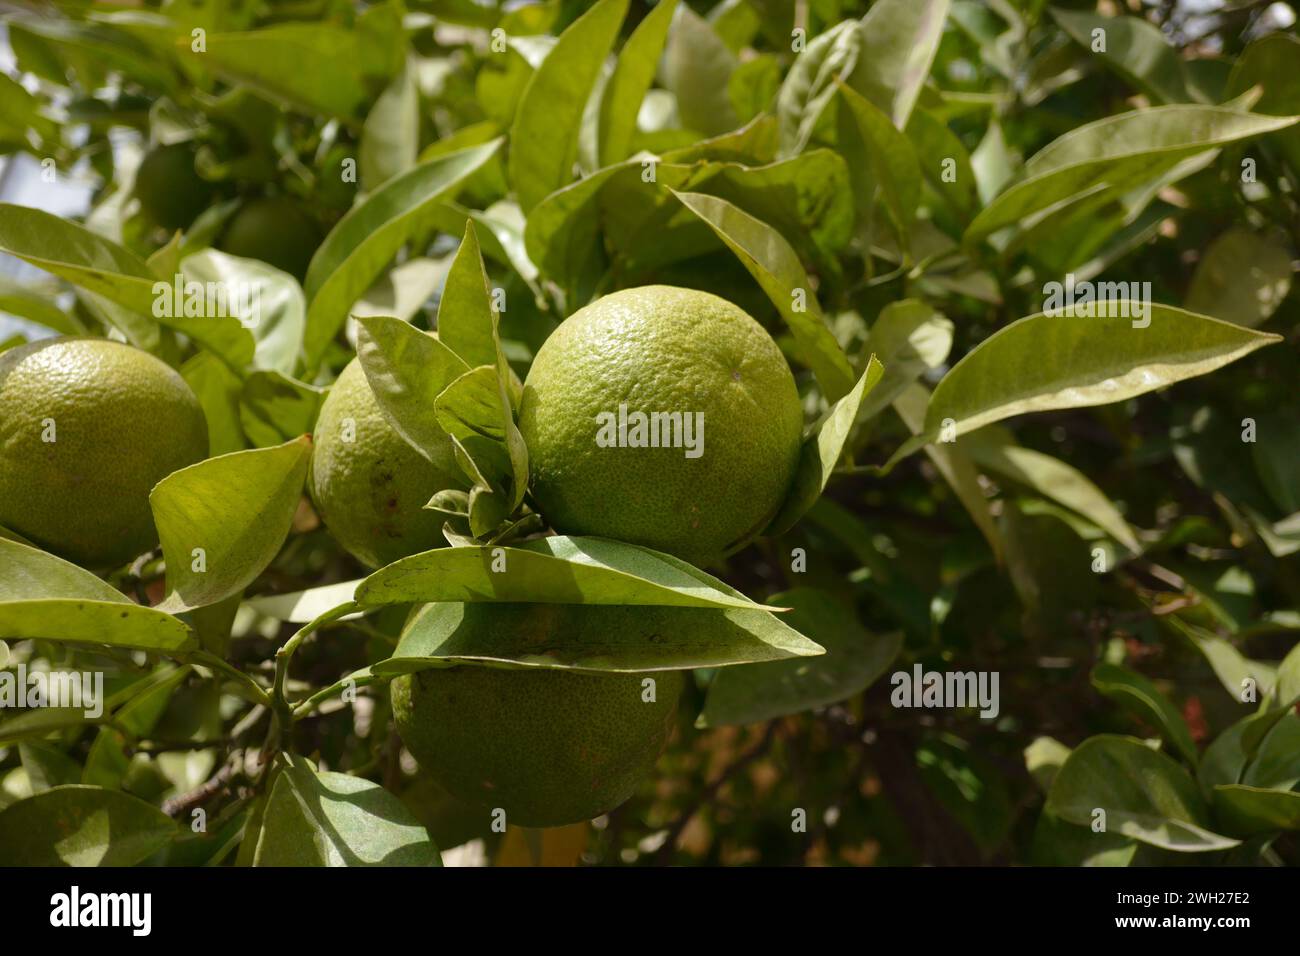 Bitter orange, also known as Seville orange or sour orange, is a citrus fruit native to East Africa, the Arabian Peninsula, Syria, and Southeast Asia. Stock Photo